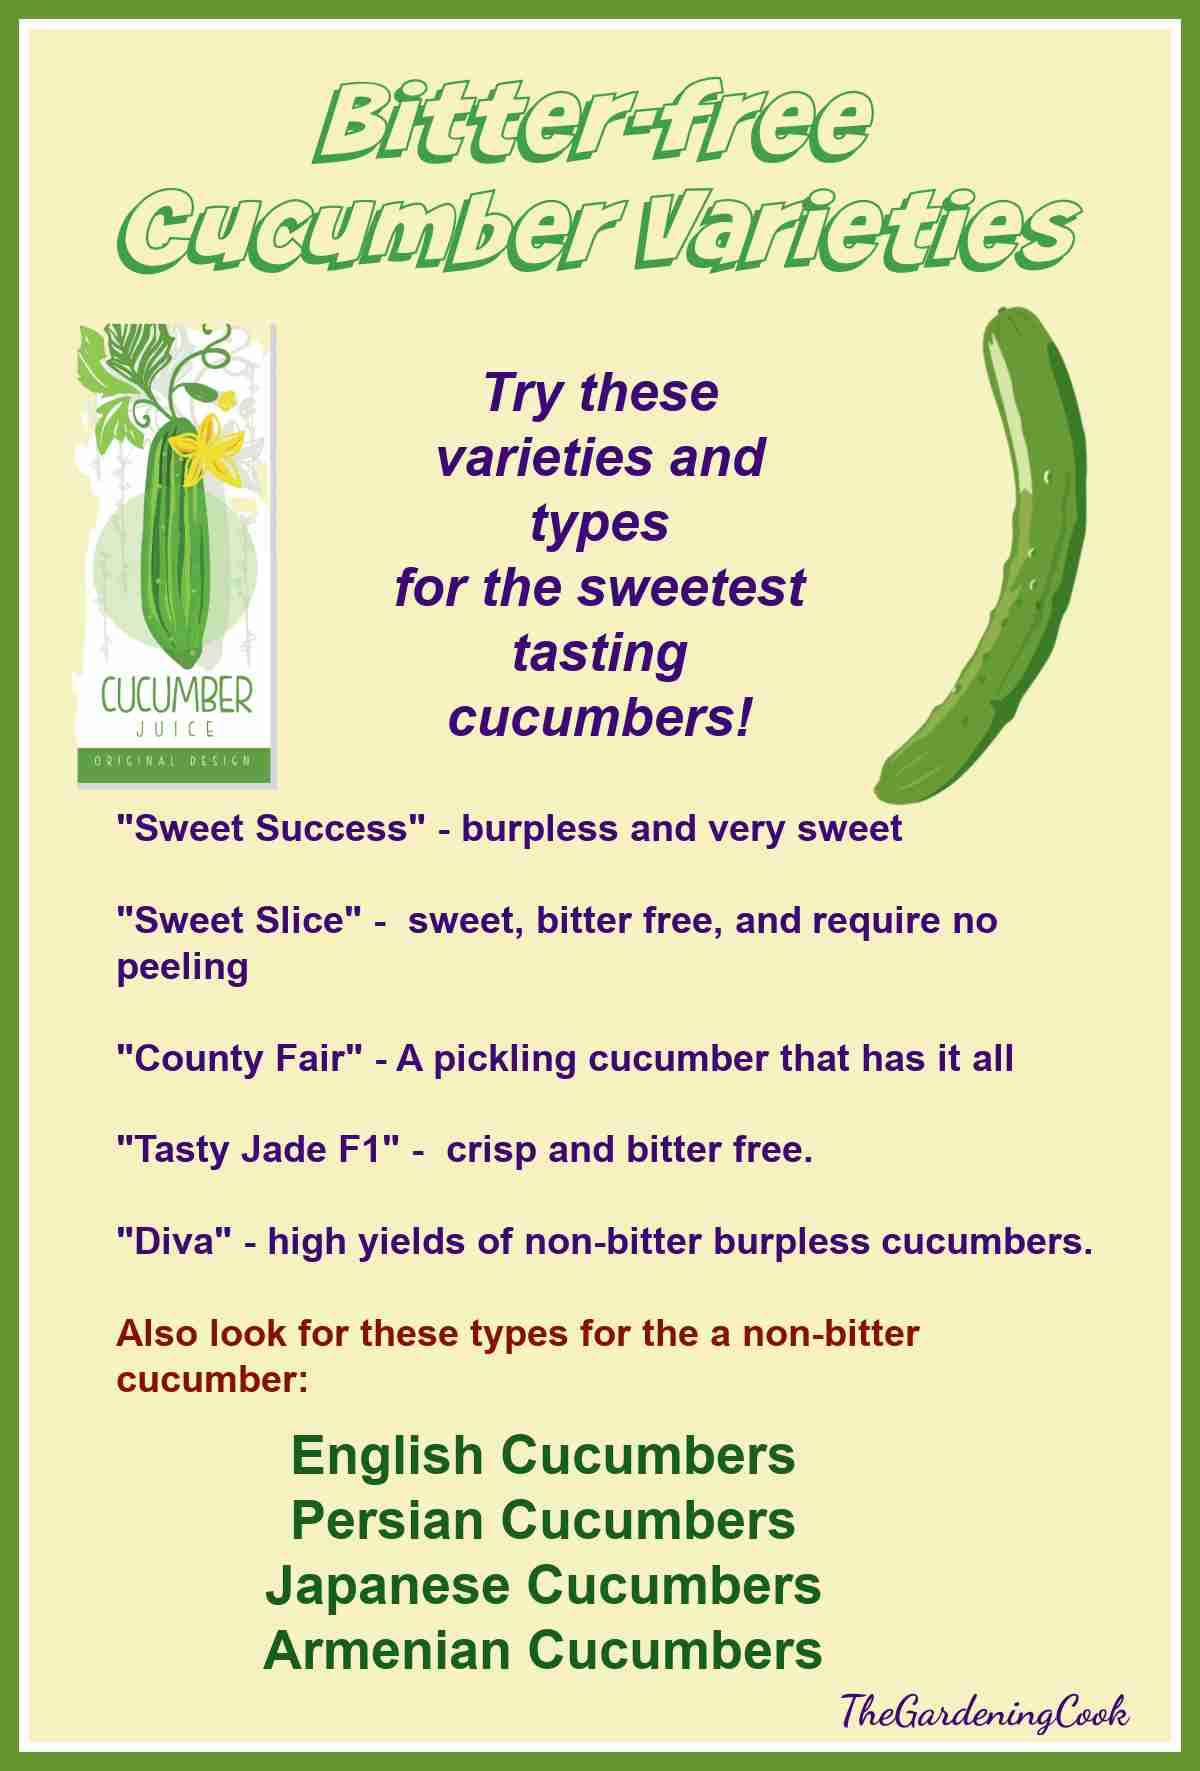 A printable showing types and varieties of bitter-free cucumbers.